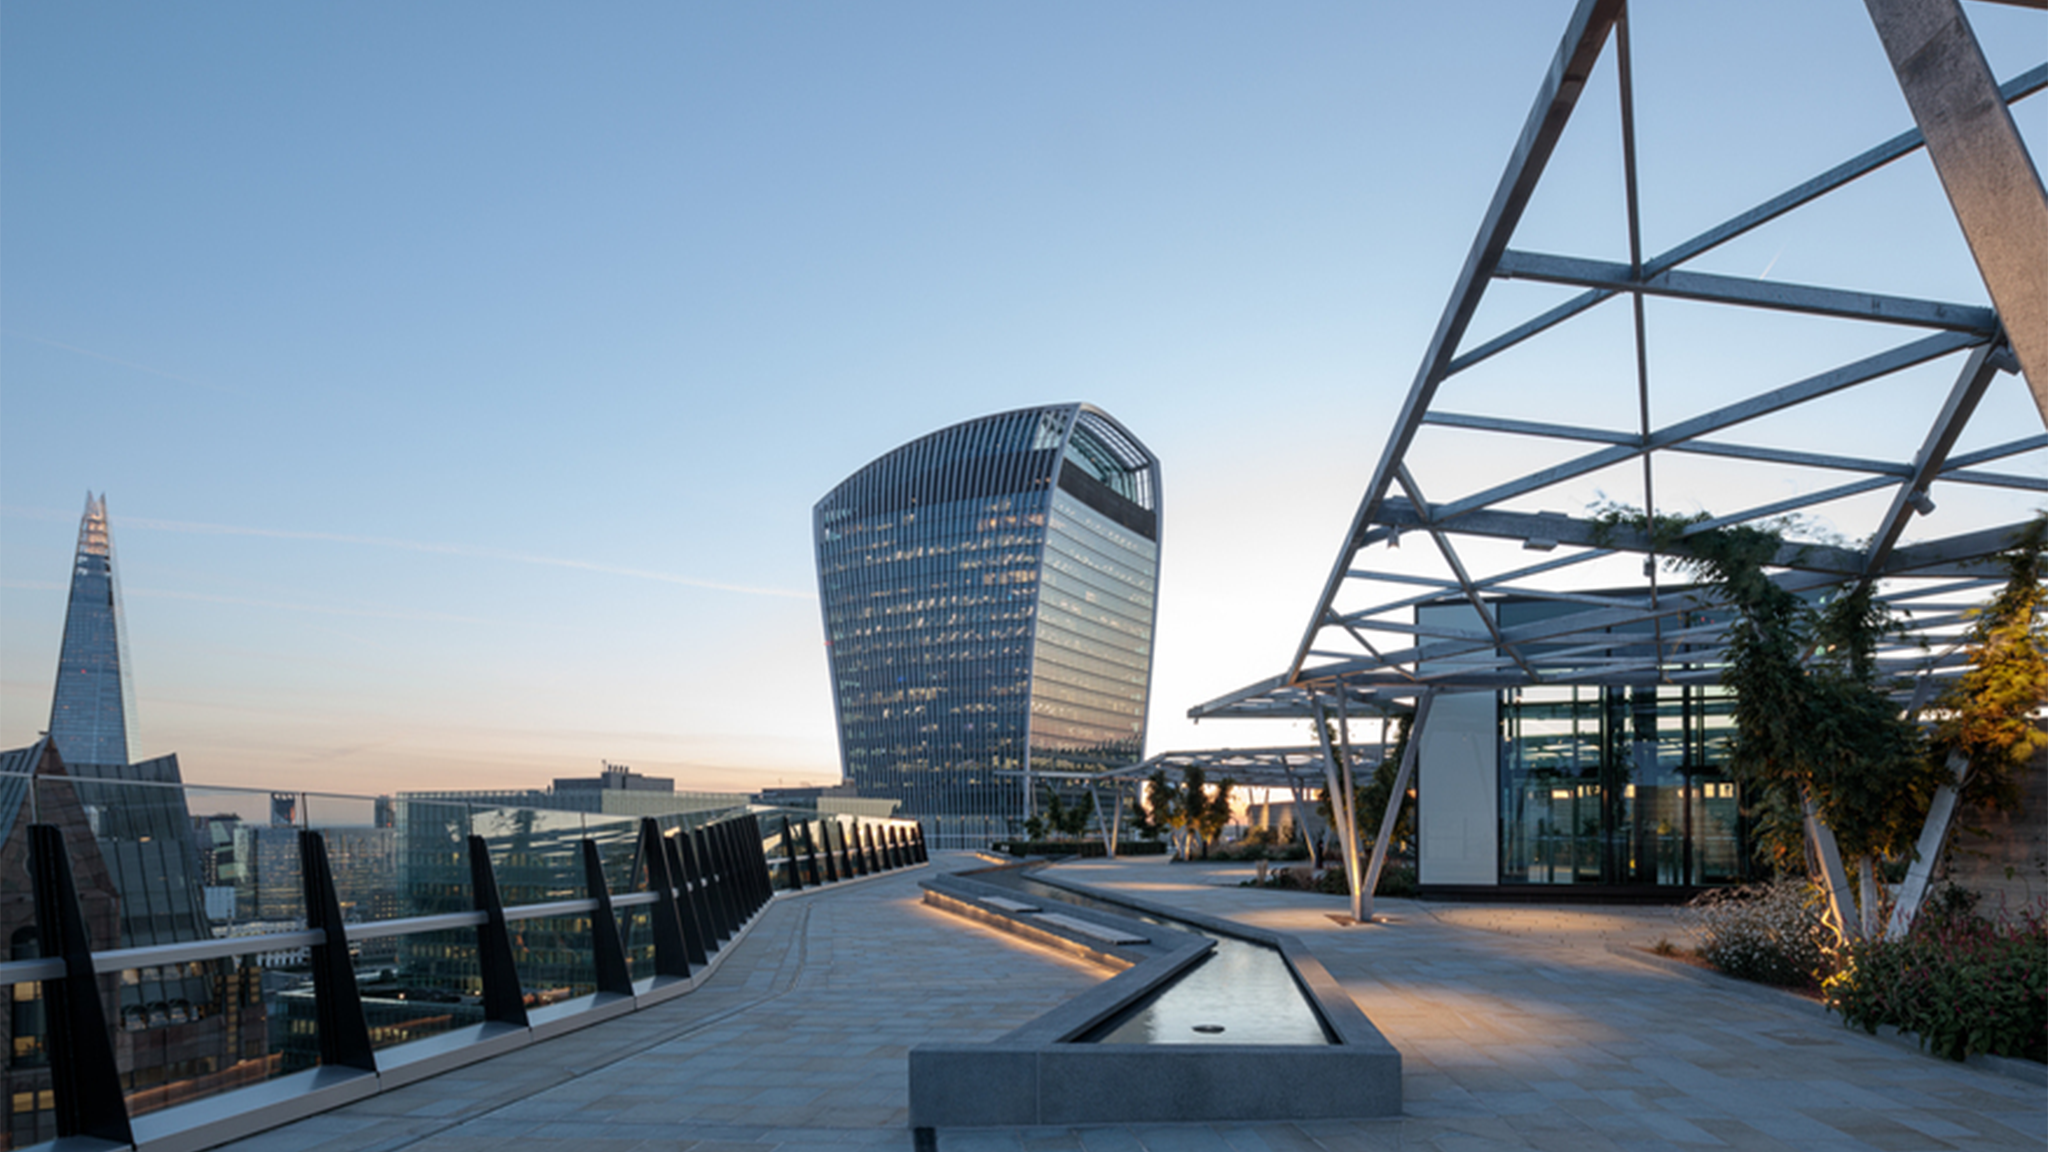 A picture of the Garden at 120 rooftop area at sunset, with the water feature visible and the Walkie Talkie building behind it.